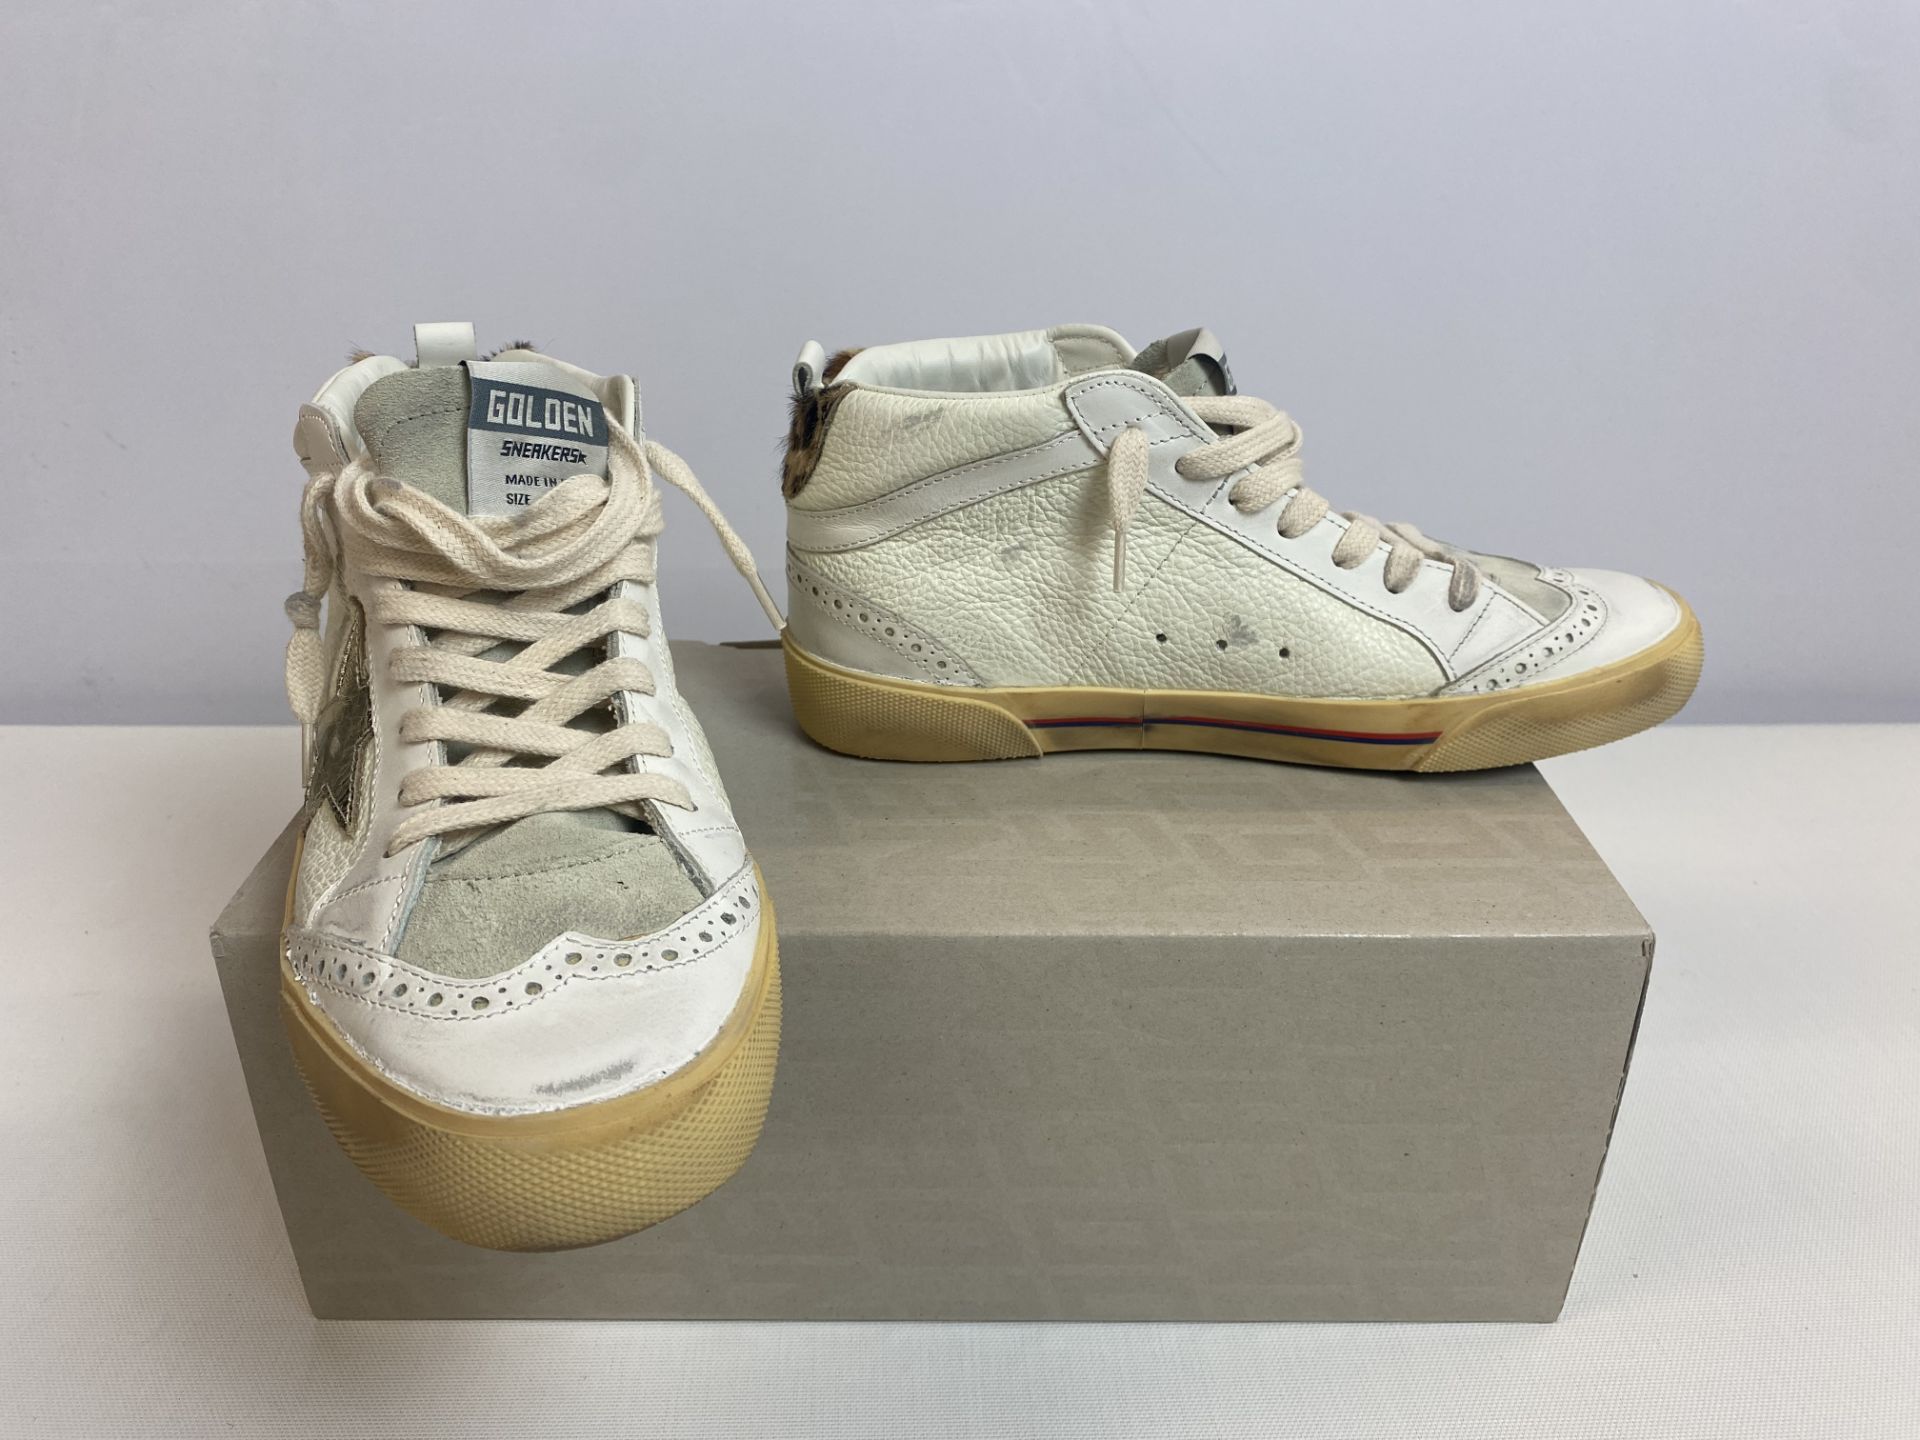 Golden Goose Mid Star Classic Sneaker Size: 37, Suede Toe Drummed Leather Quarter Laminate Star Leat - Image 3 of 3